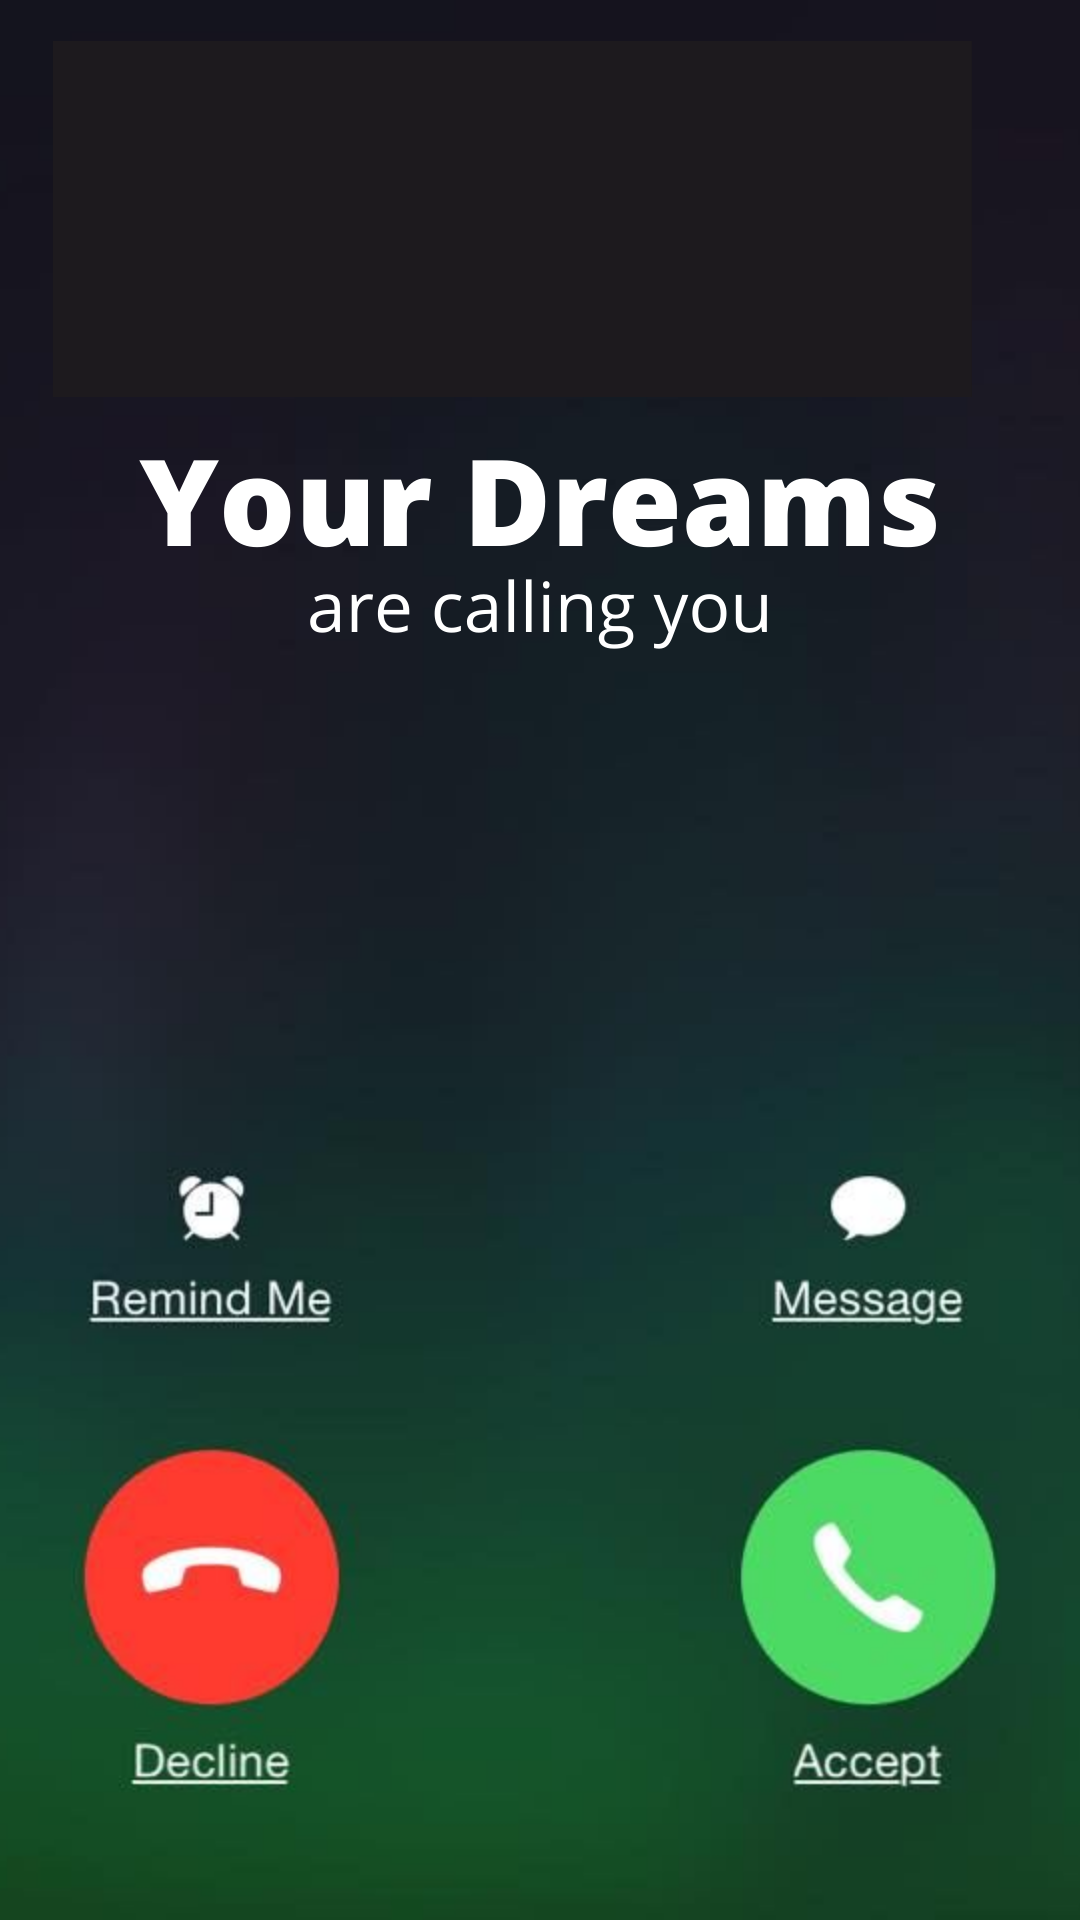 Your Dreams Are Calling You. What Will Be Your Answer?